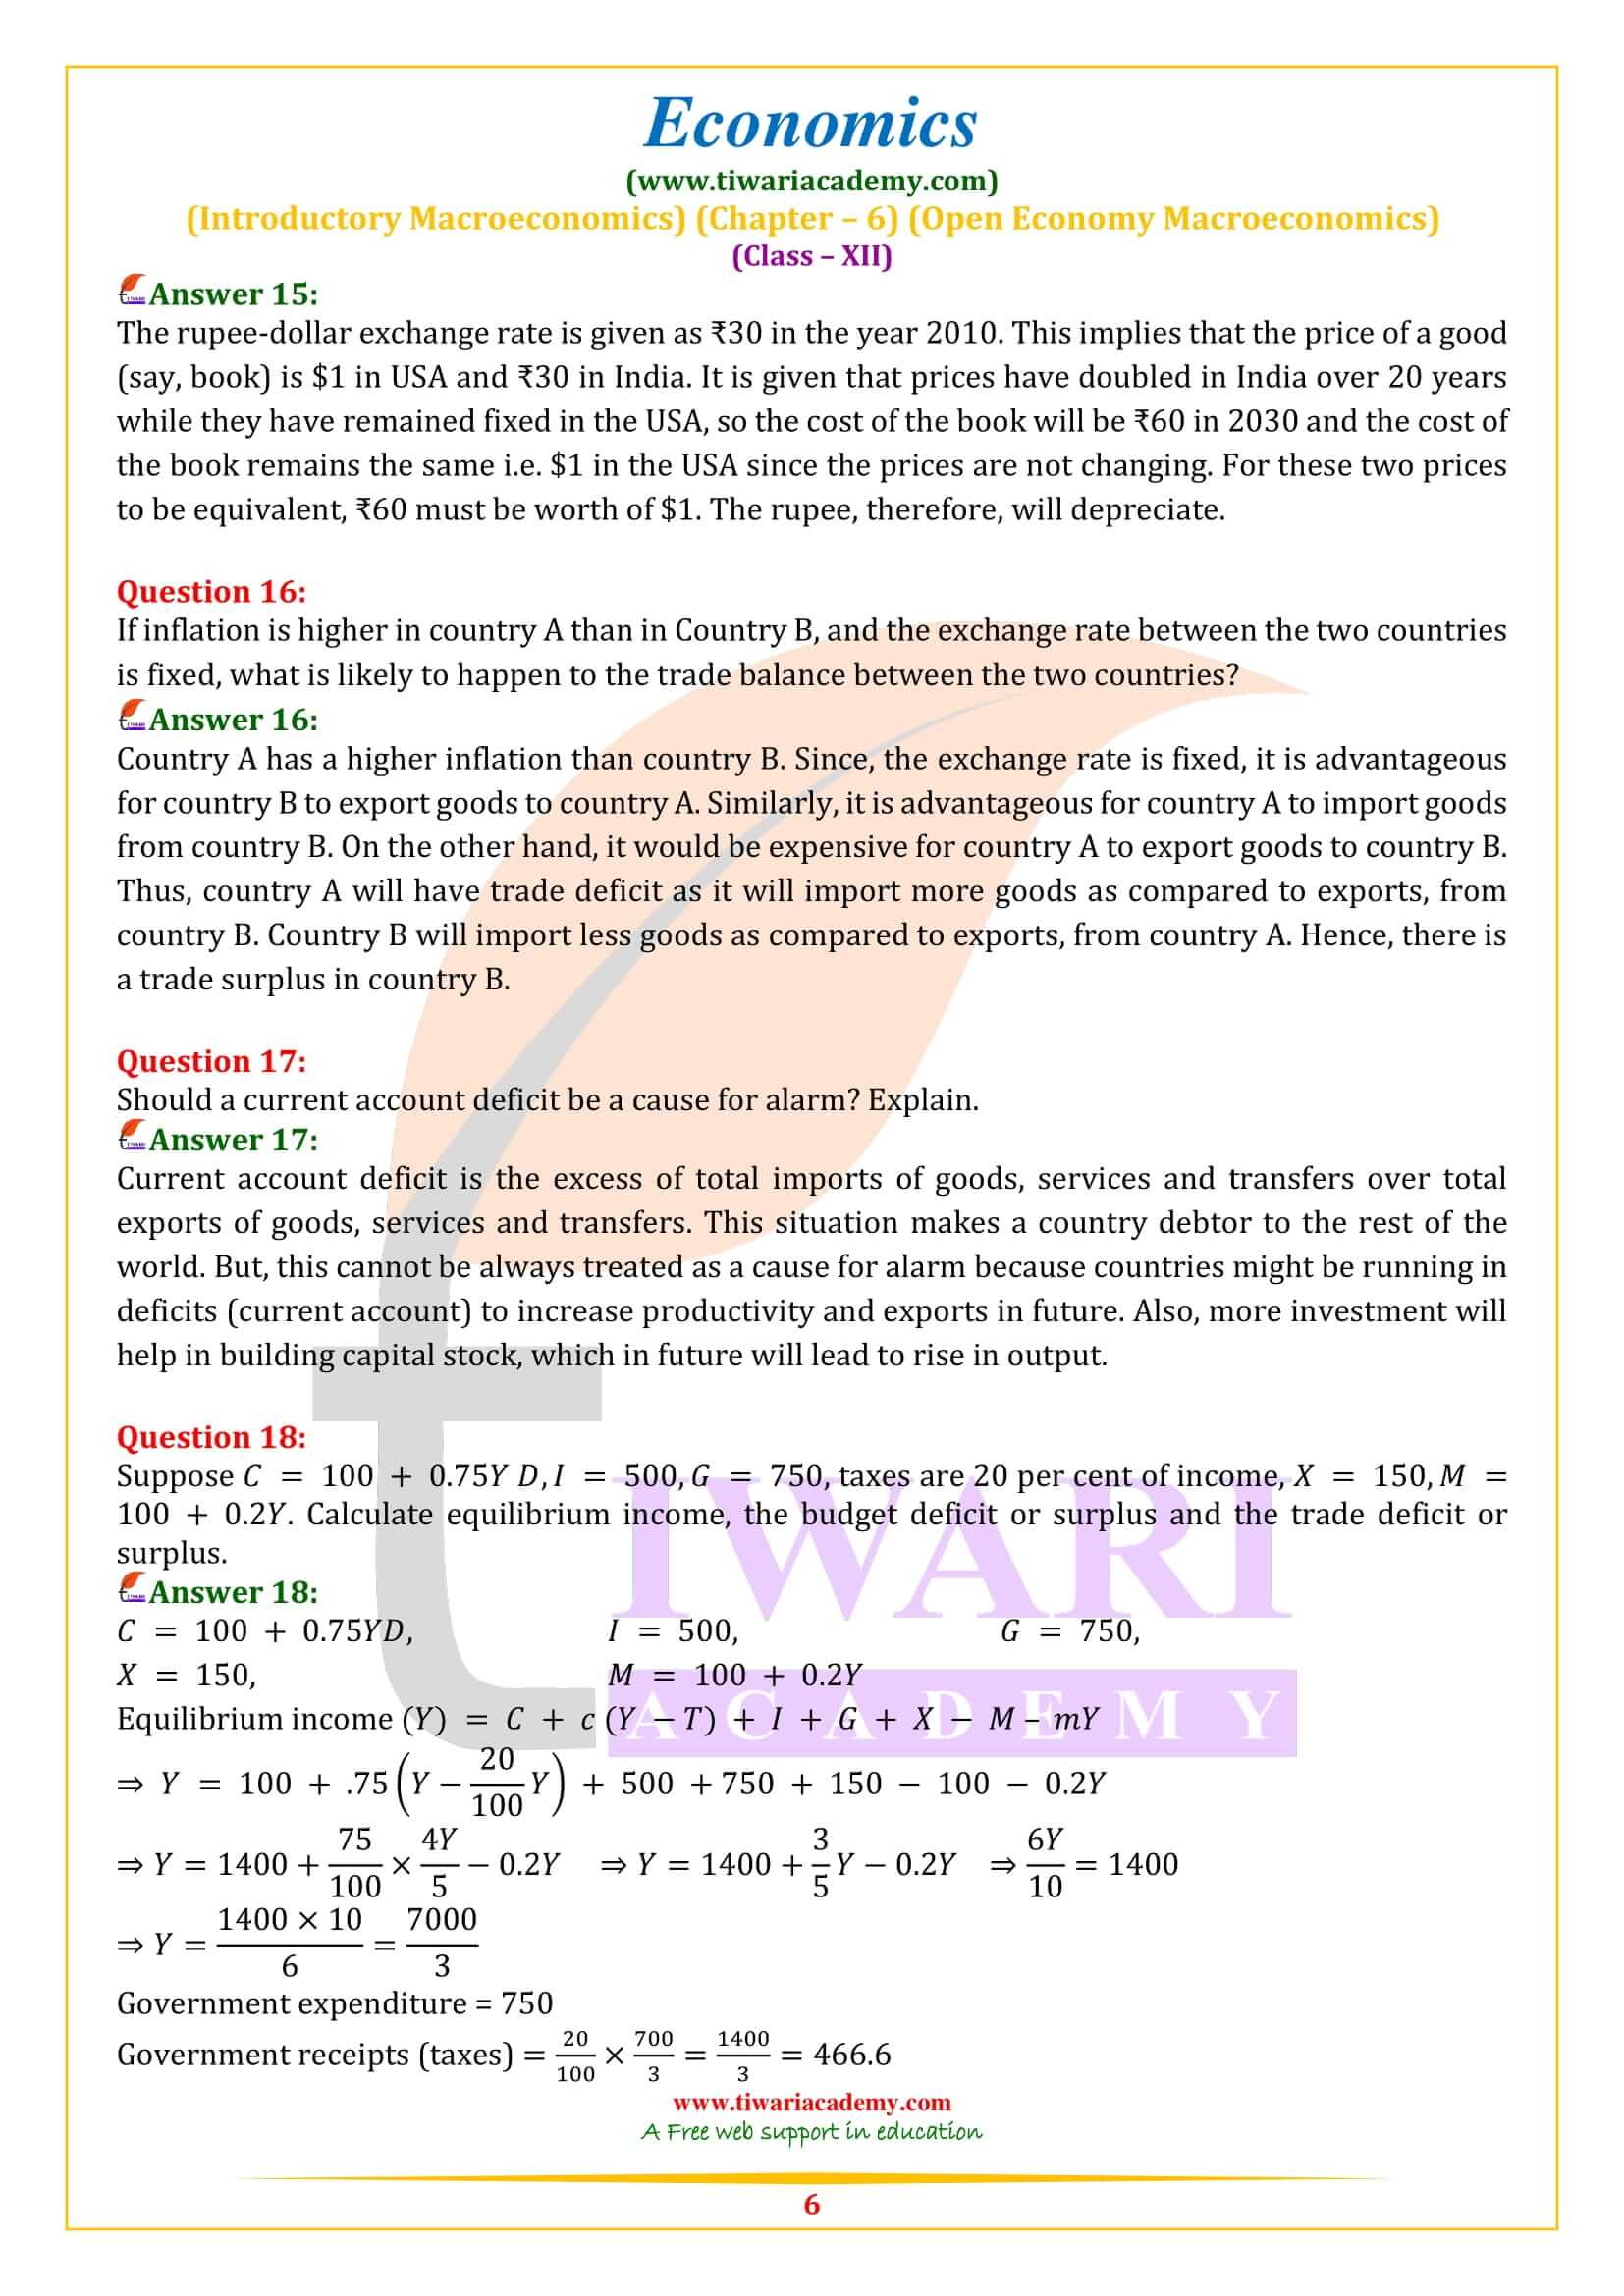 NCERT Solutions for Class 12 Economics Chapter 6 answers